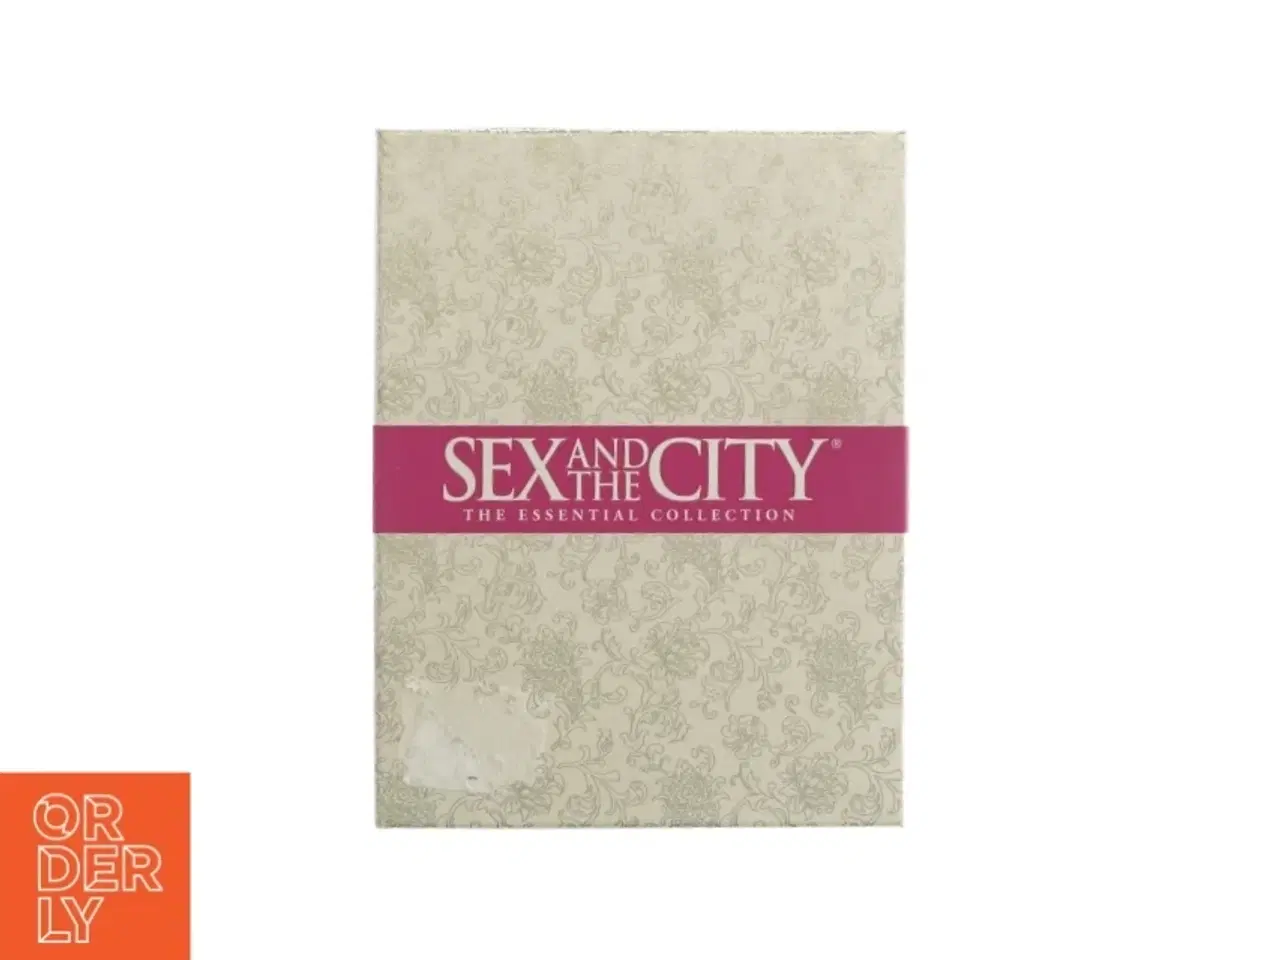 Billede 1 - Sex and the city (DVD)